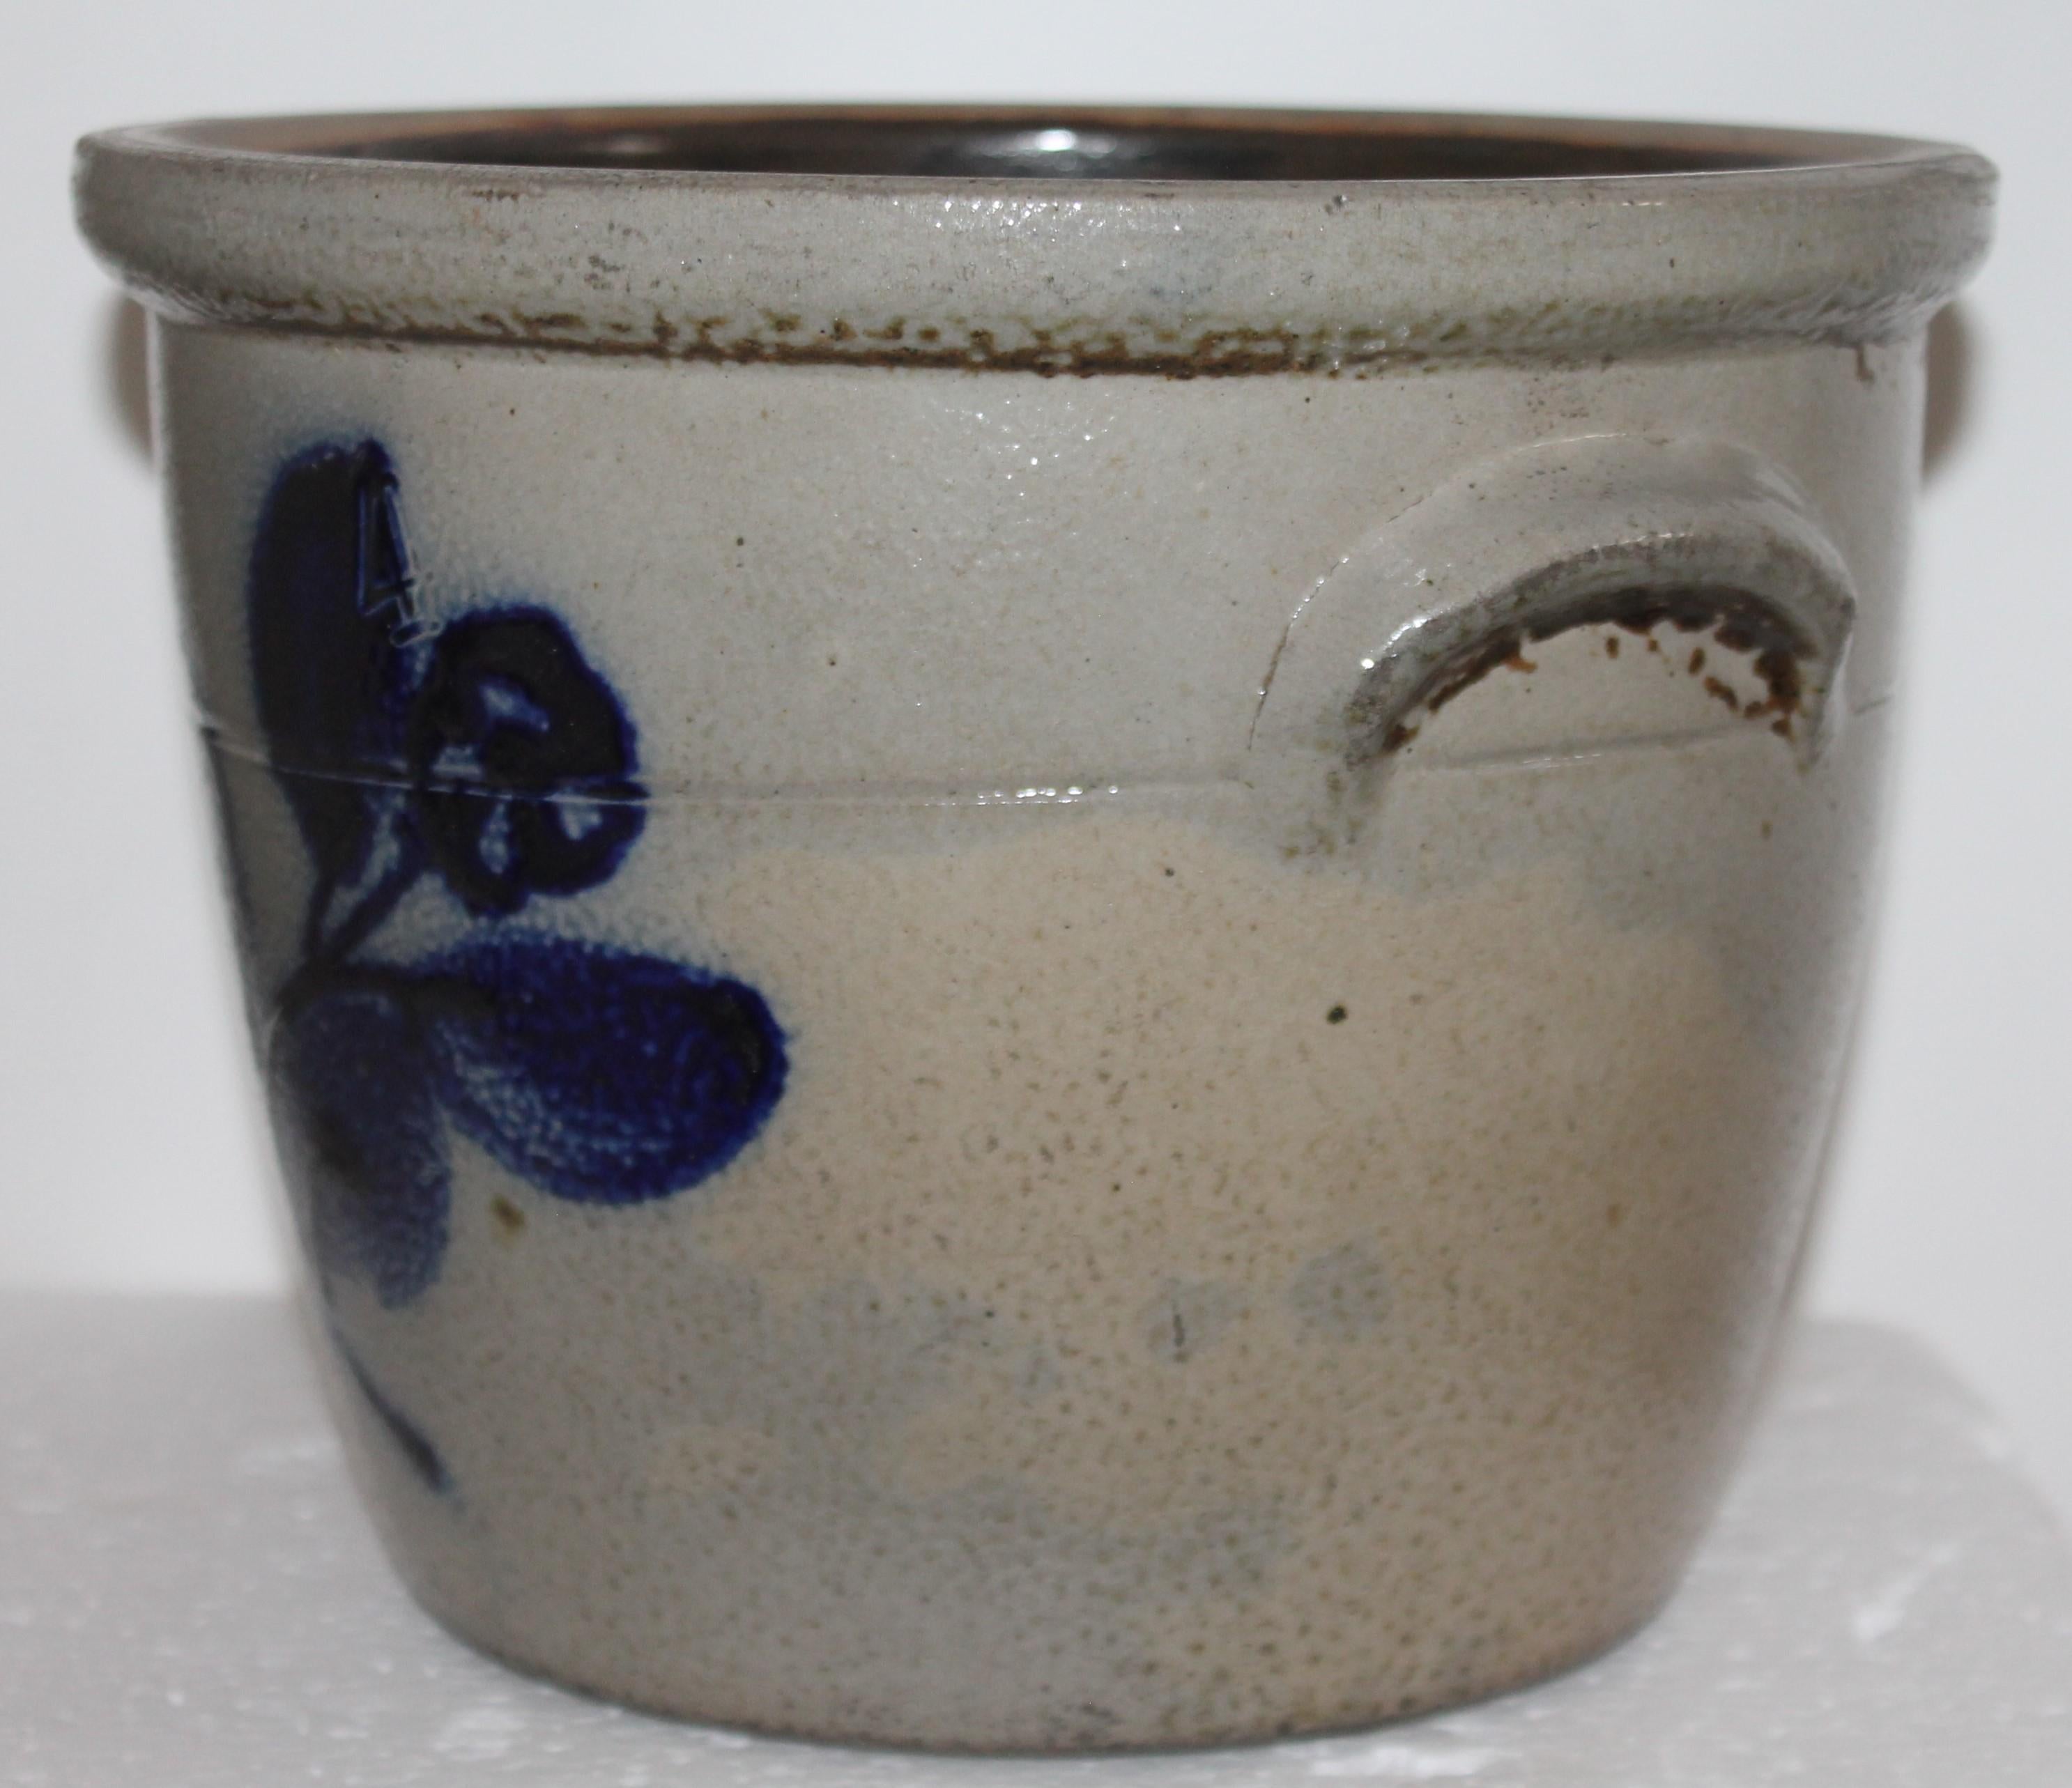 19th century original decorated stoneware crock with double handles in fine condition. Fantastic folky floral design.